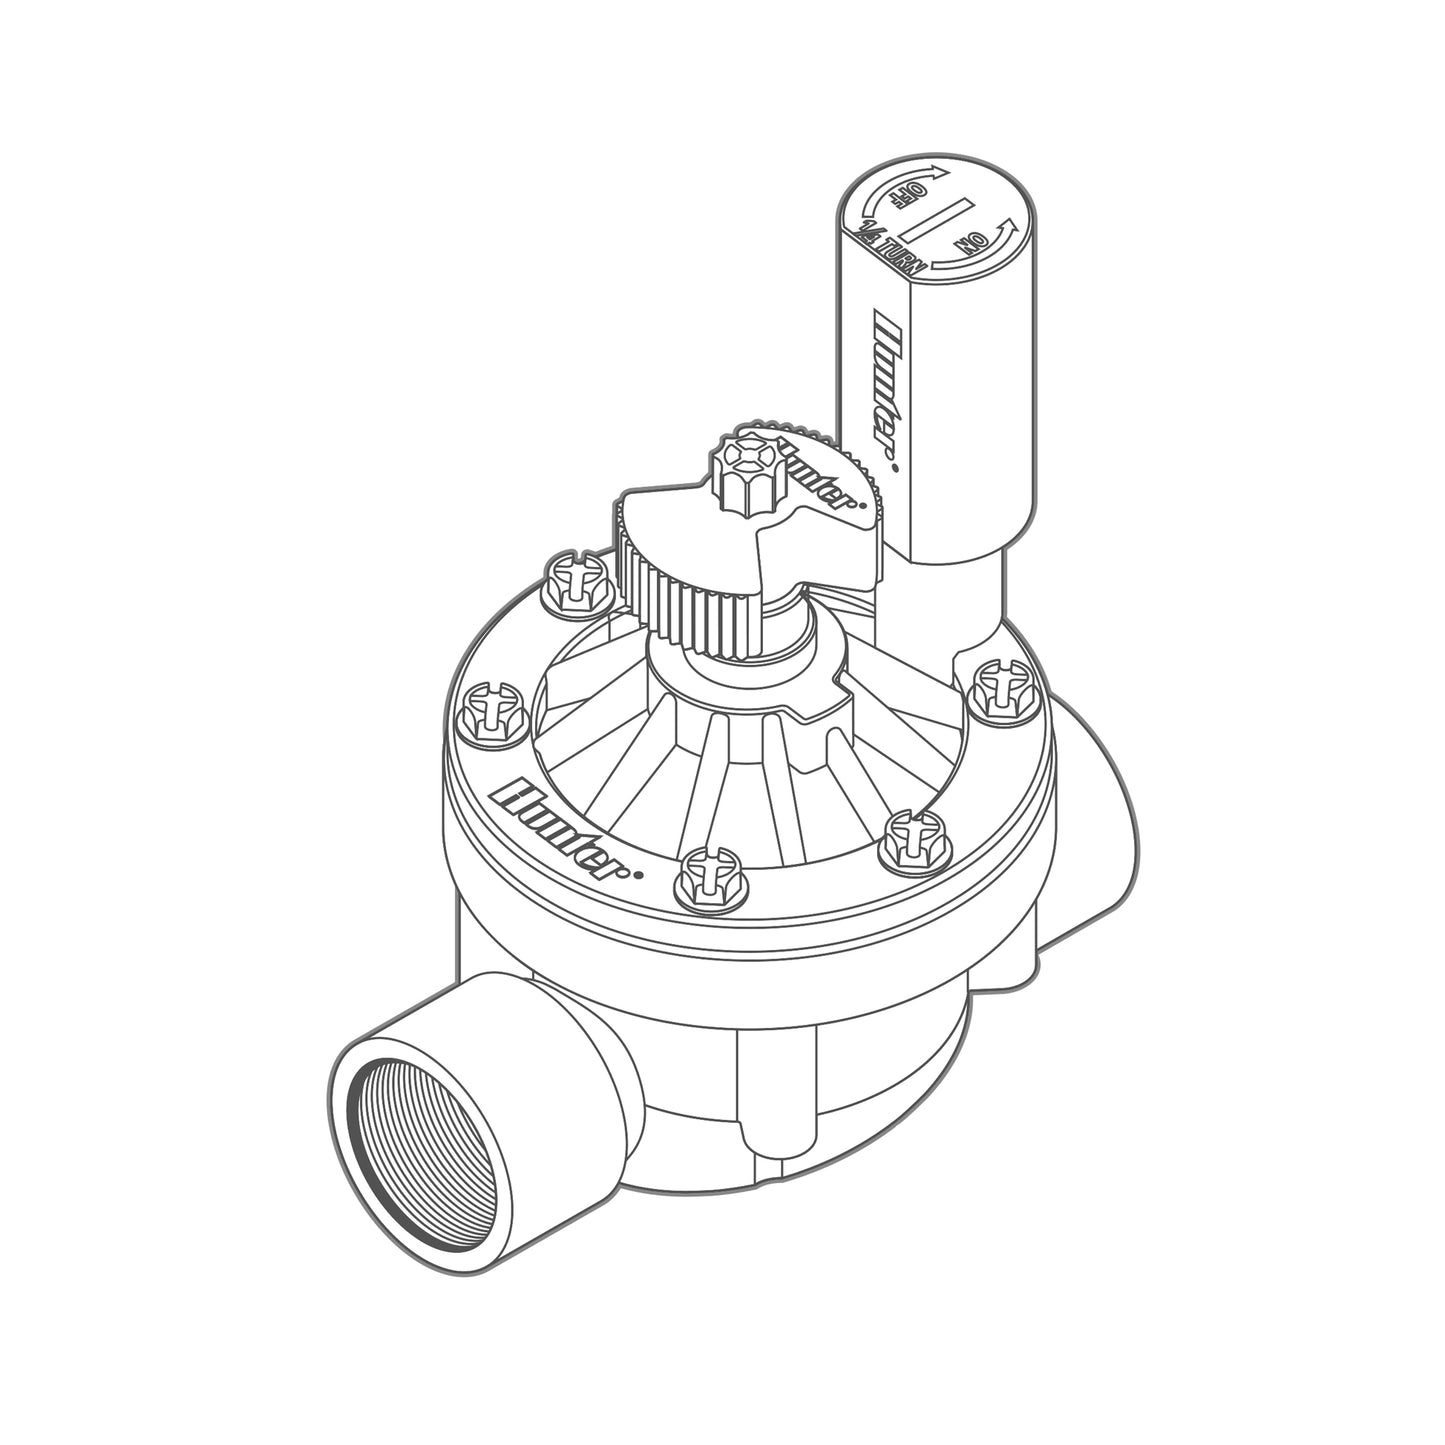 ICV-151G-FS - 1-1/2" FPT Commercial Irrigation Valve with Flow Control & Filter Sentry - ICV Series